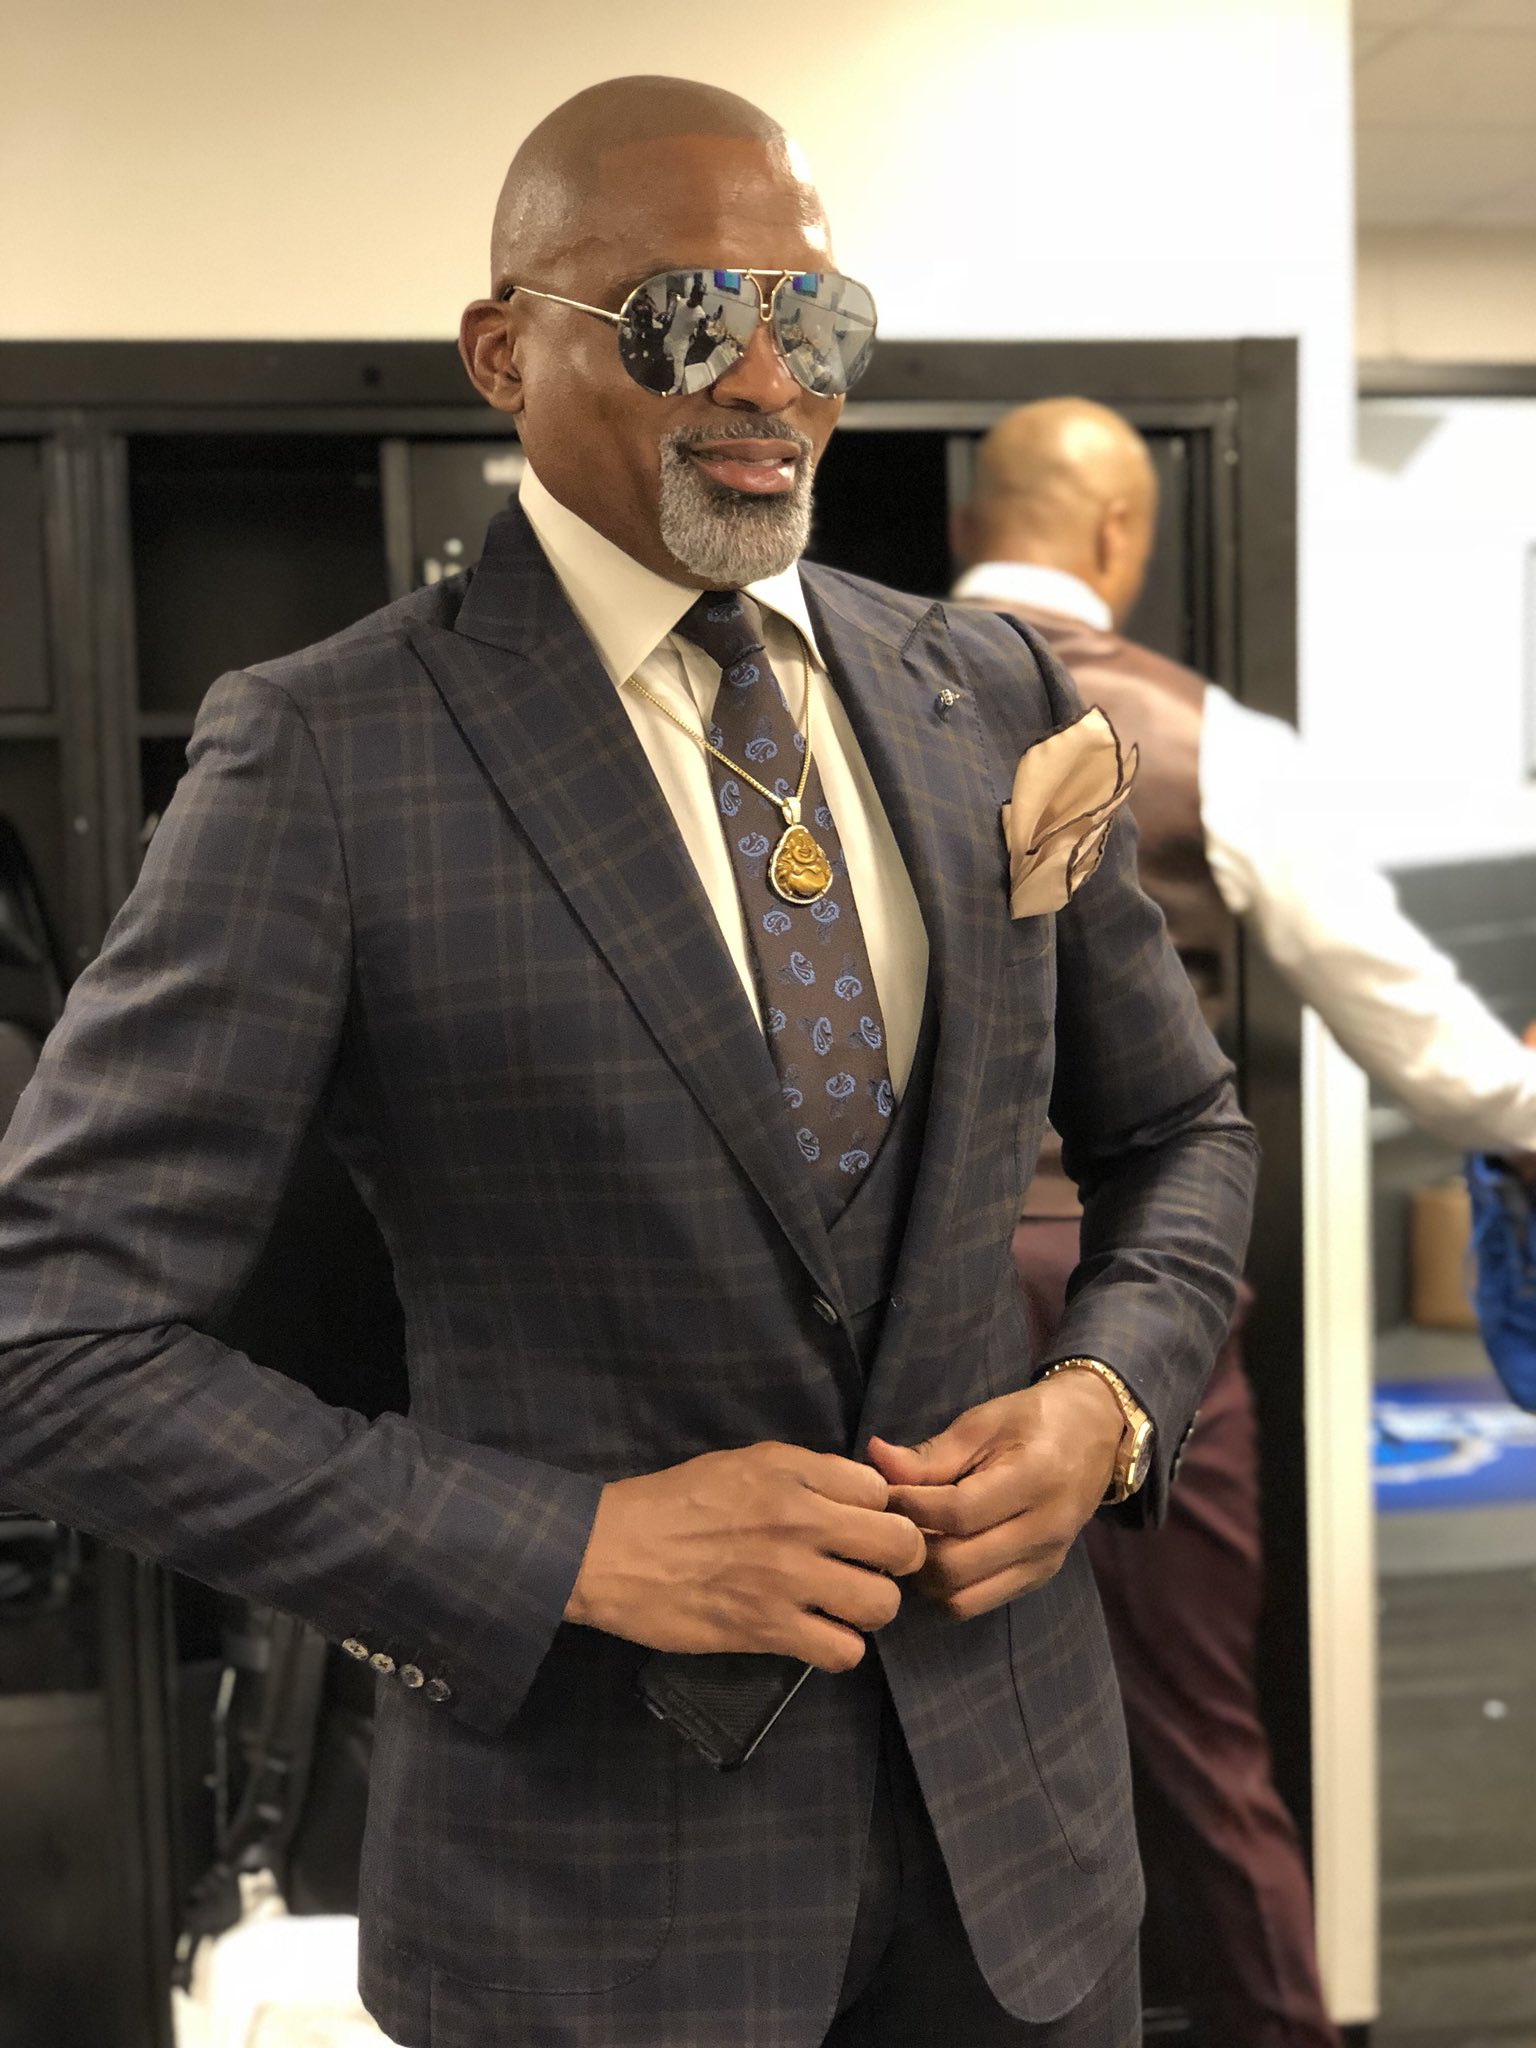 Happy Birthday to one of the flyest in the game, Cuttino Mobley. Preciate you, 